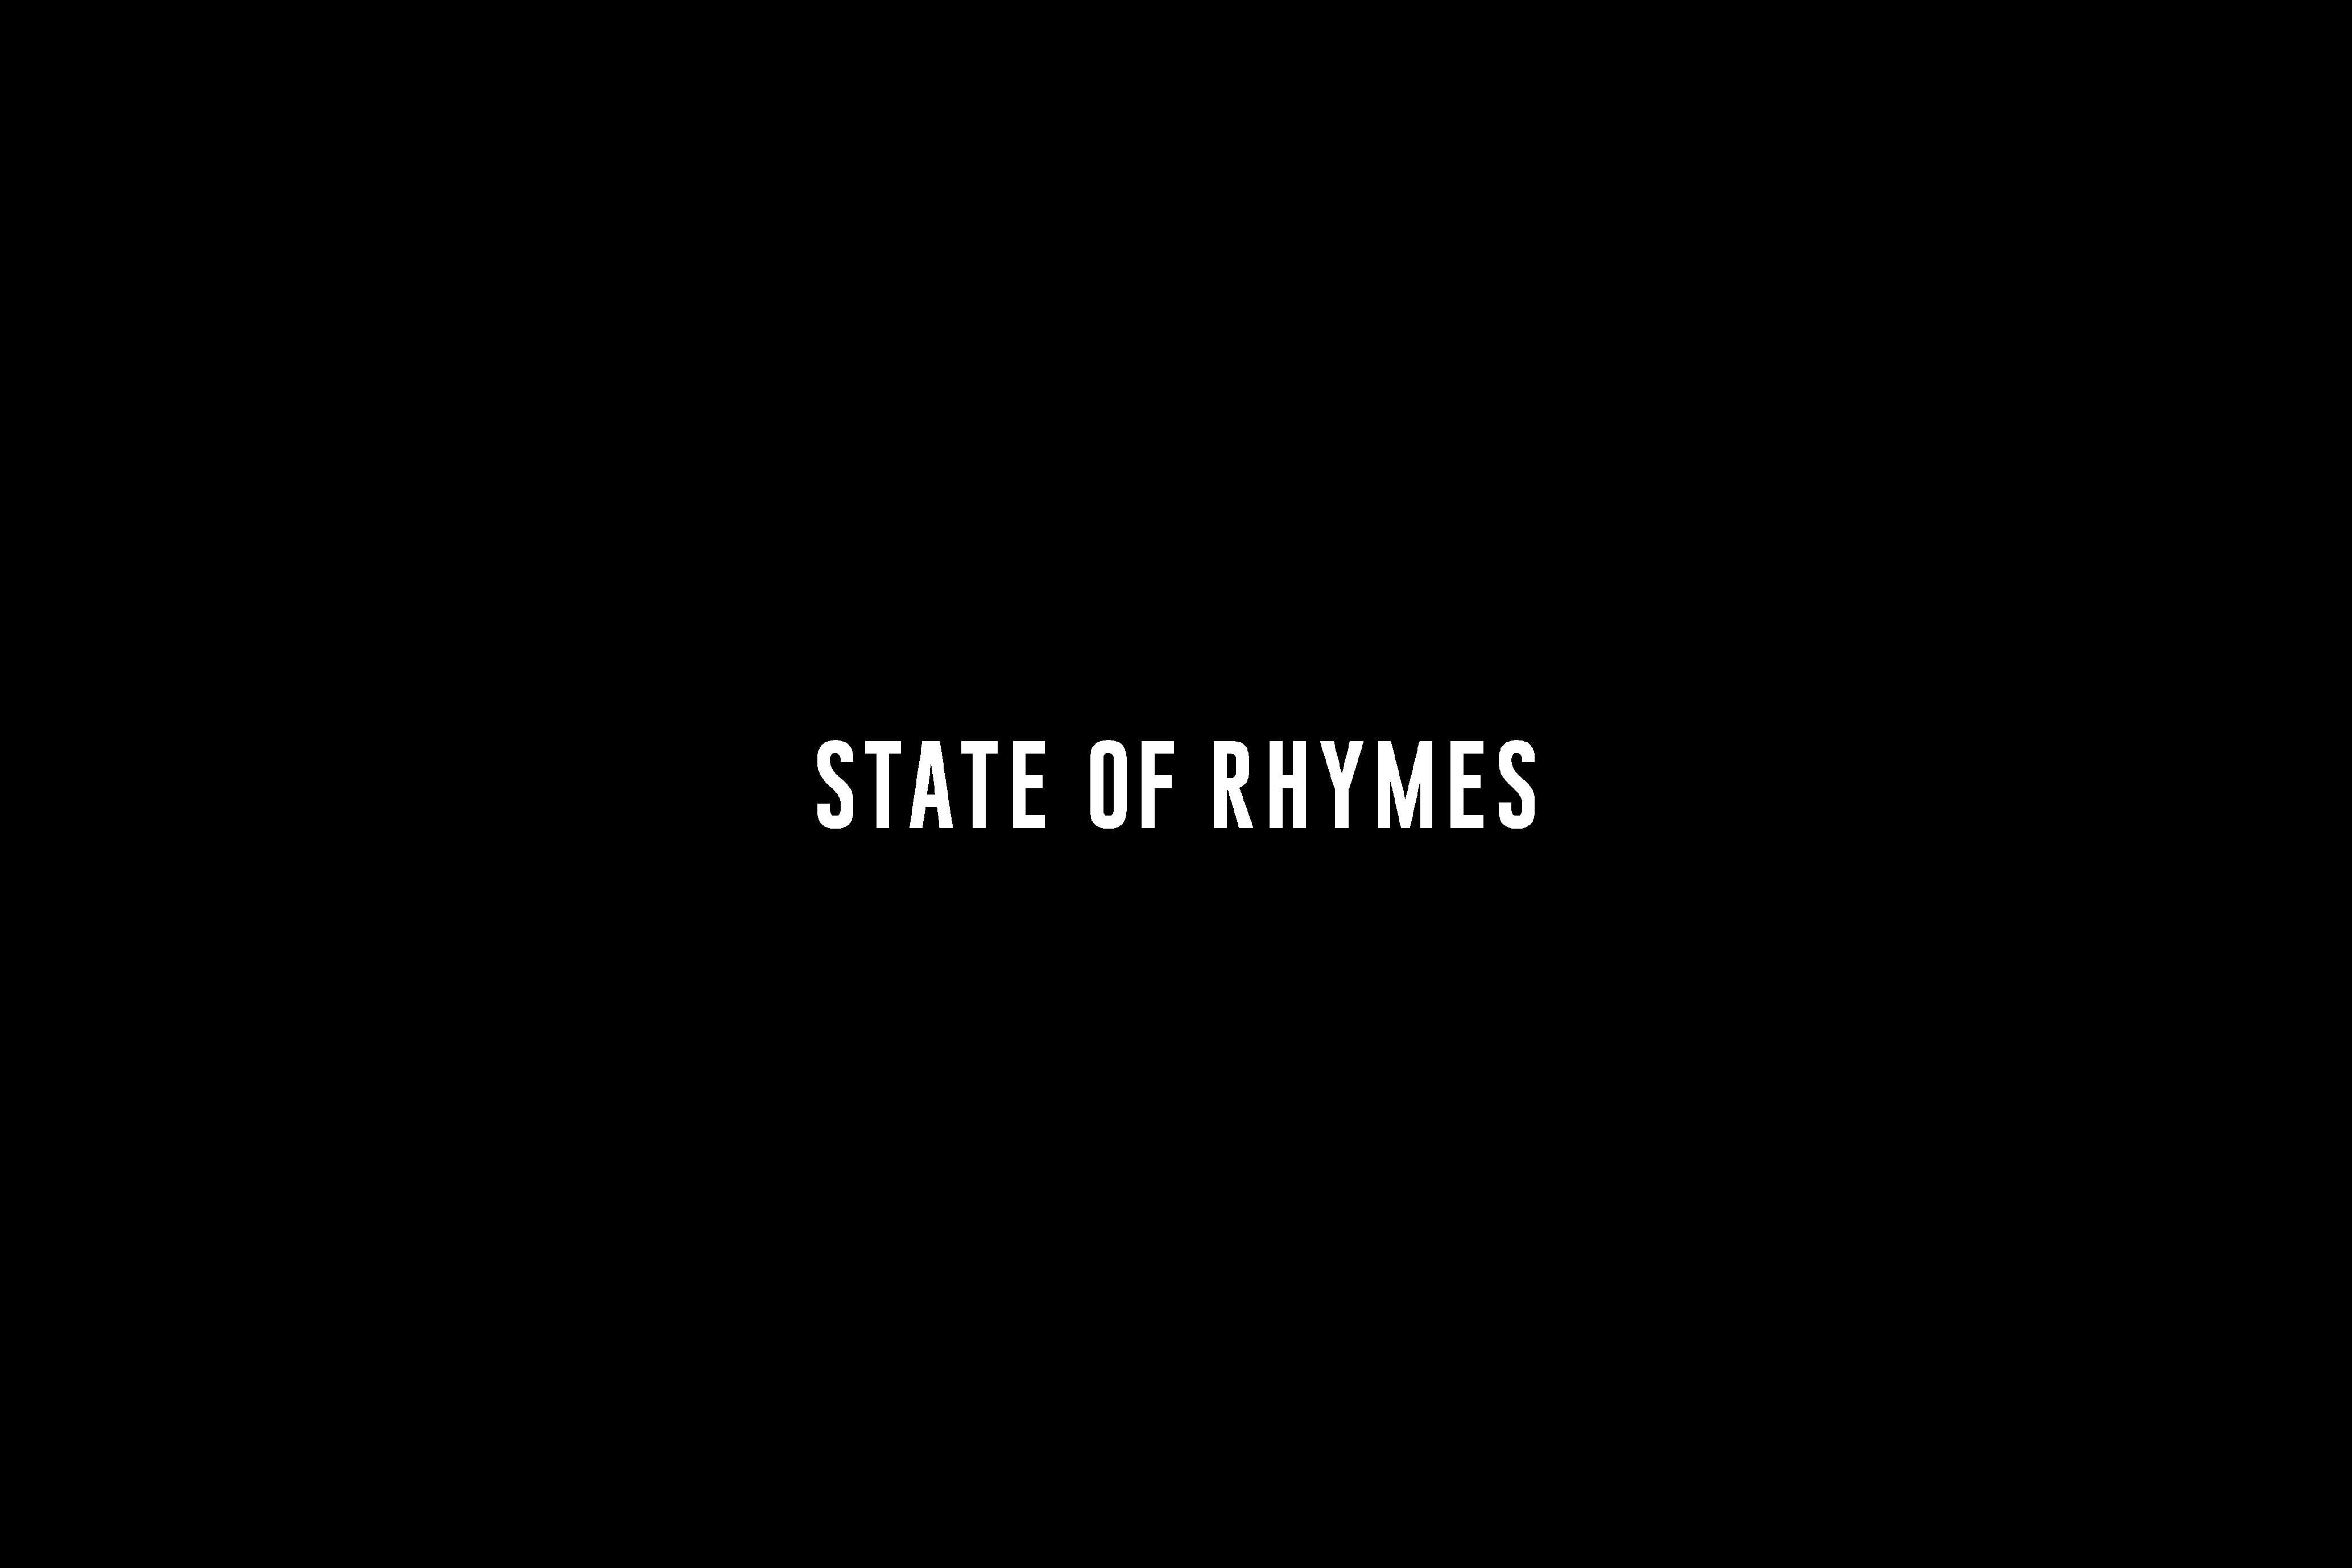 STATE OF RHYMES